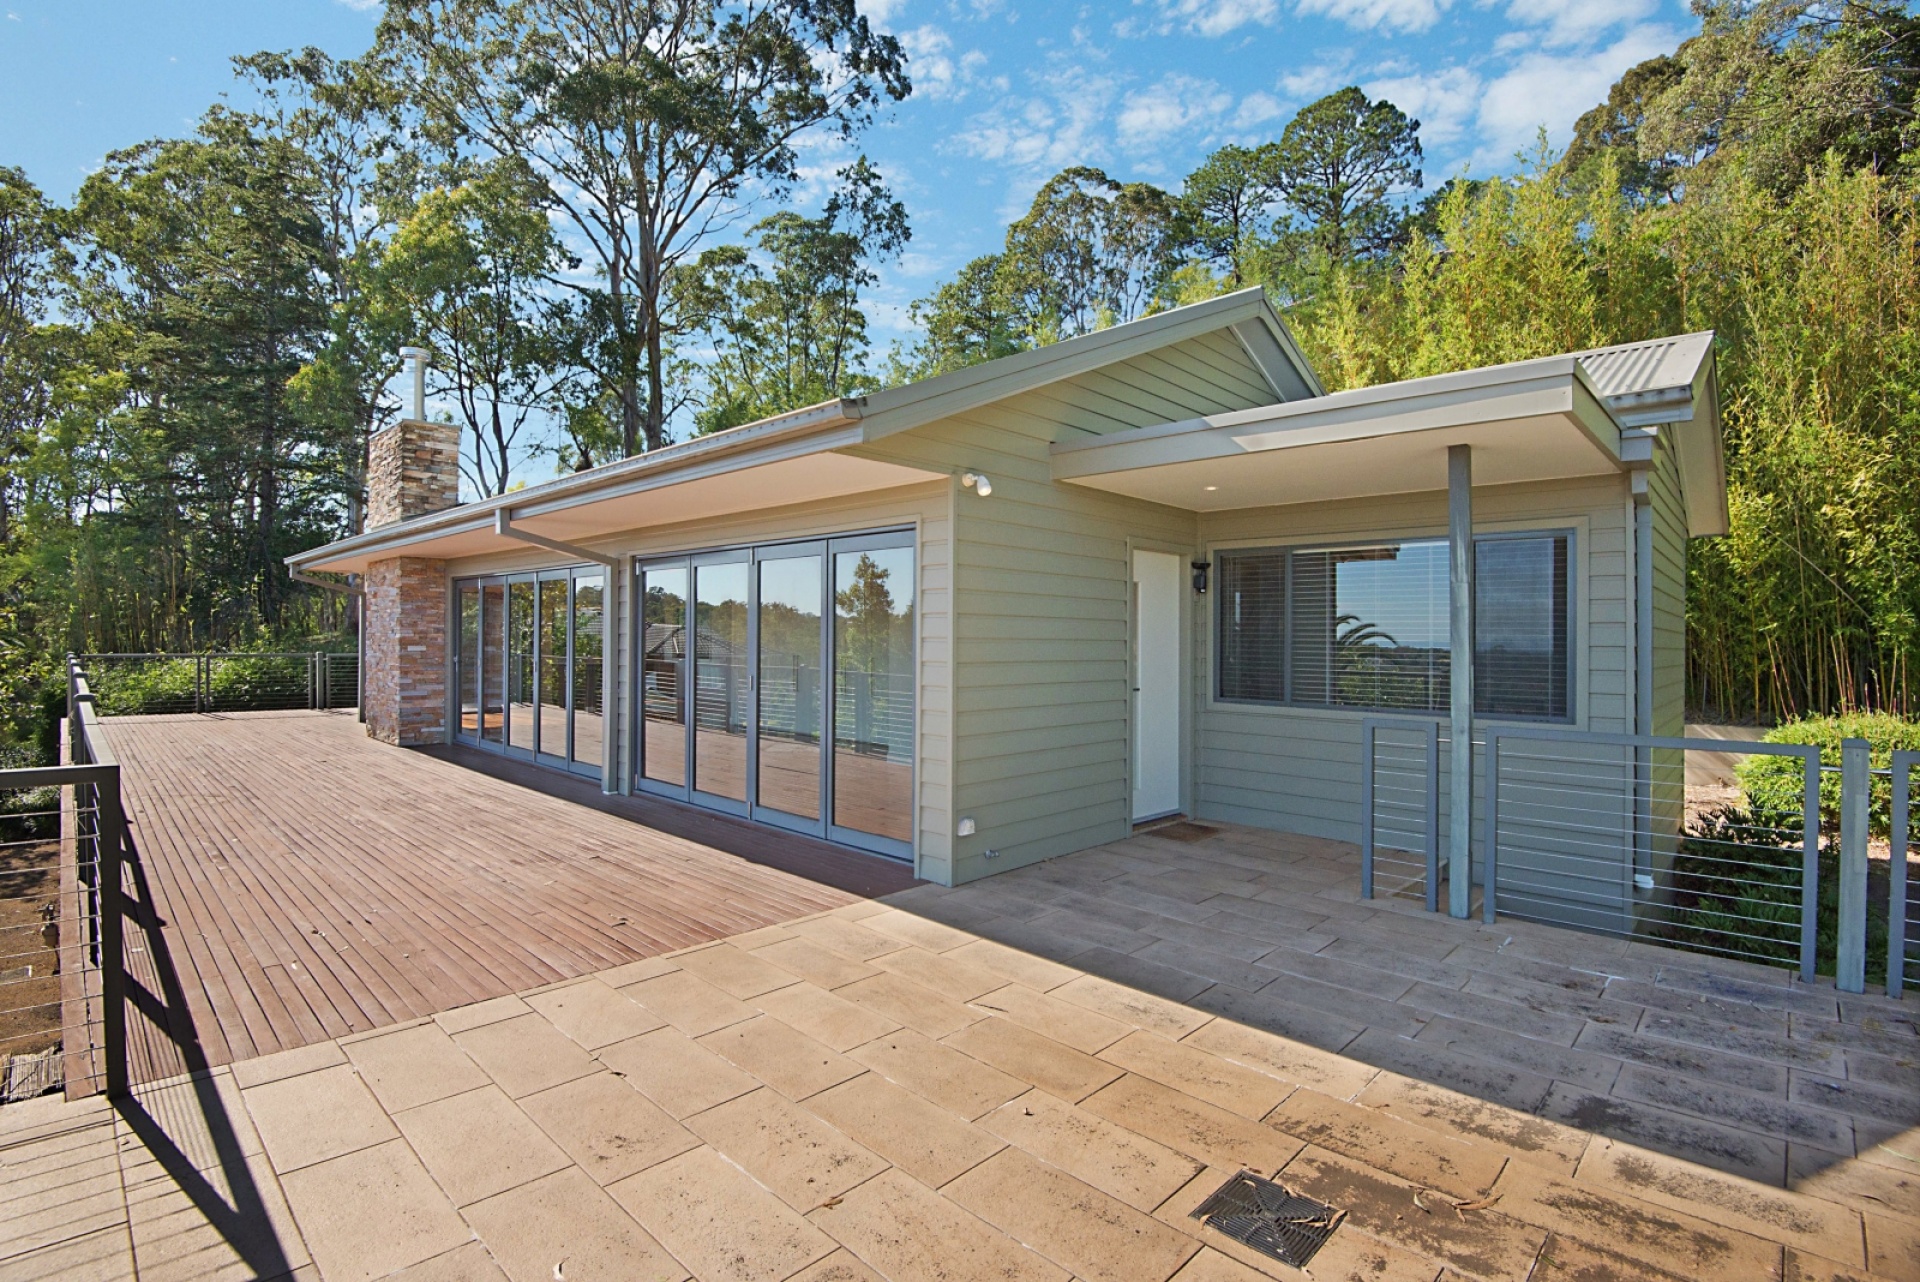 2 Rooms, House, Leased, Old Castle Hill Road, 2 Bathrooms, Listing ID 1659, Castle Hill, NSW, Australia, 2154,